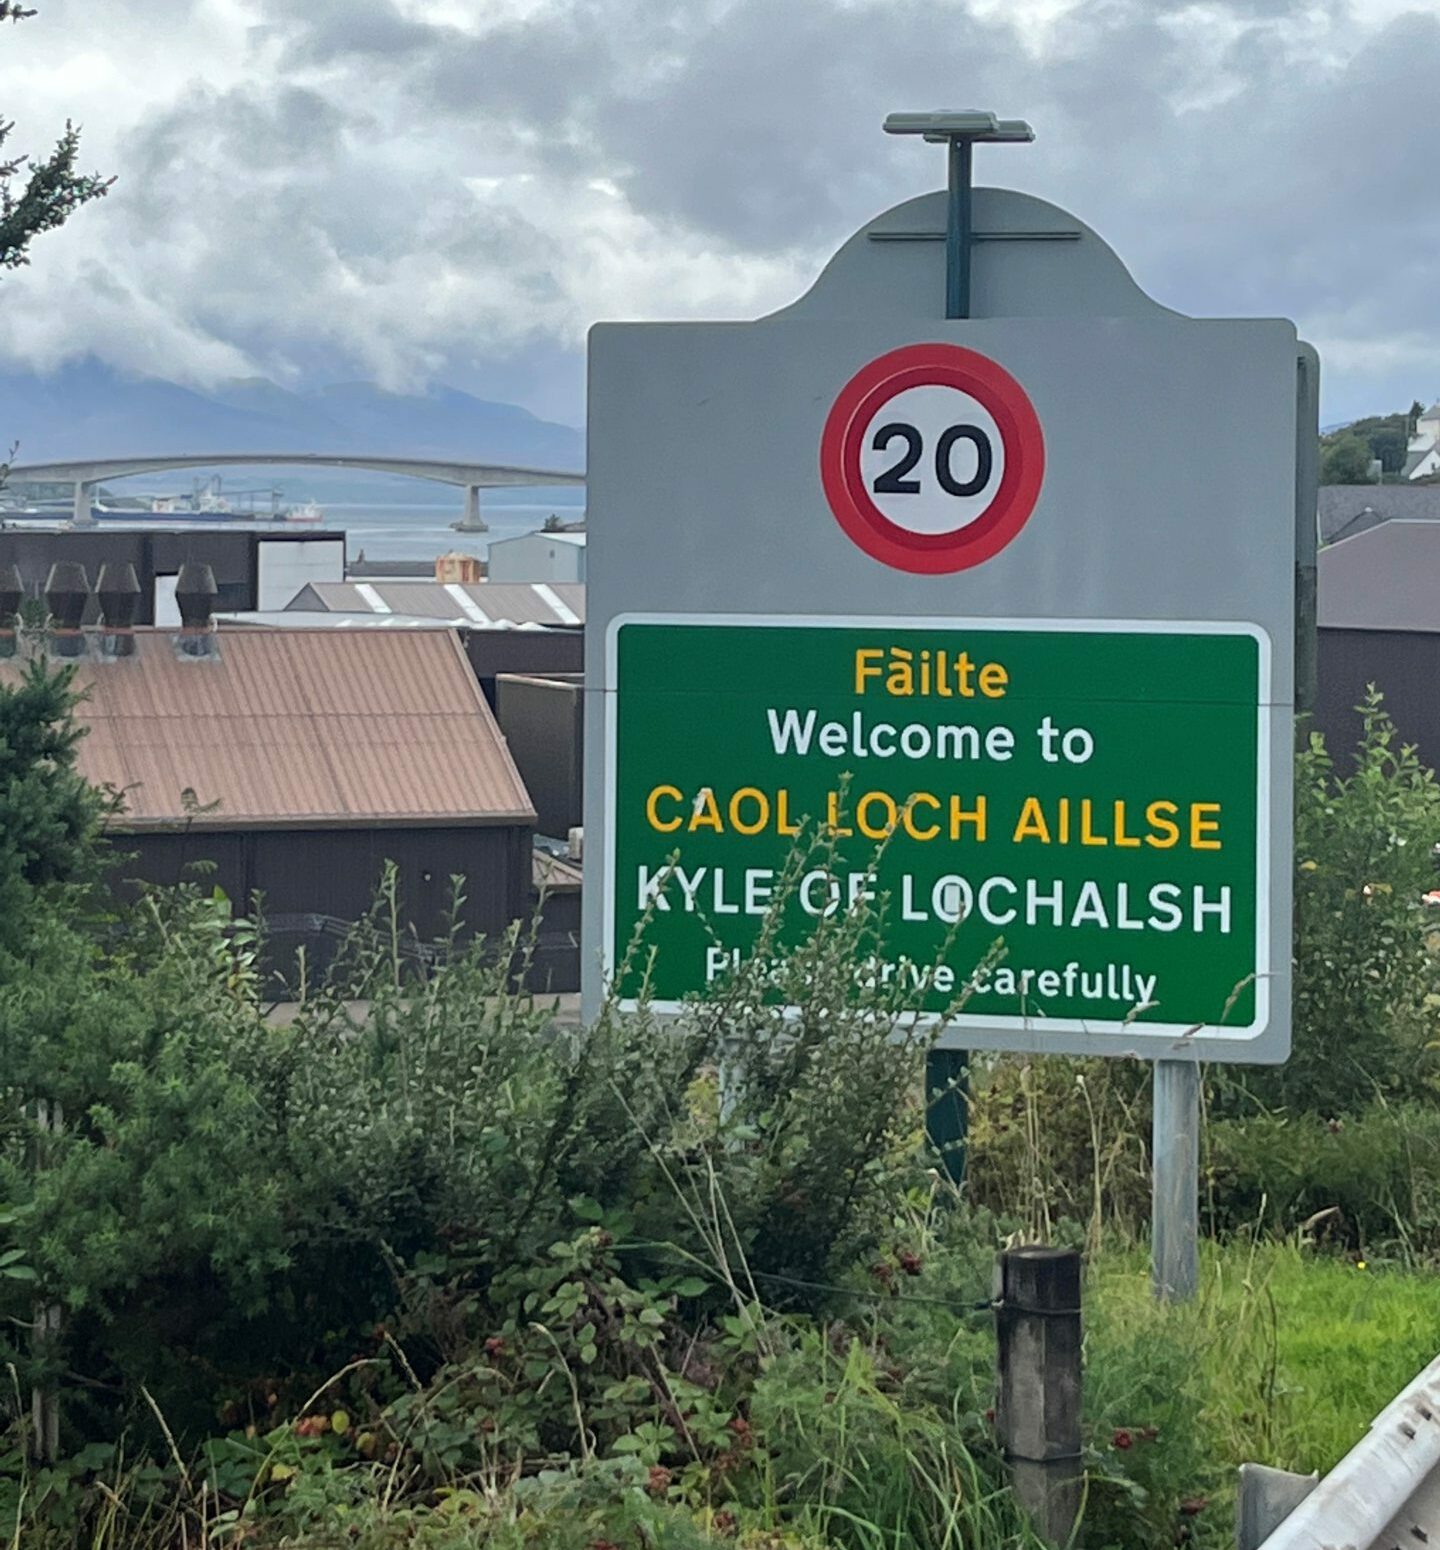 Close-up of 20mph sign at Kyle of Lochalsh with Skye bridge behind. 